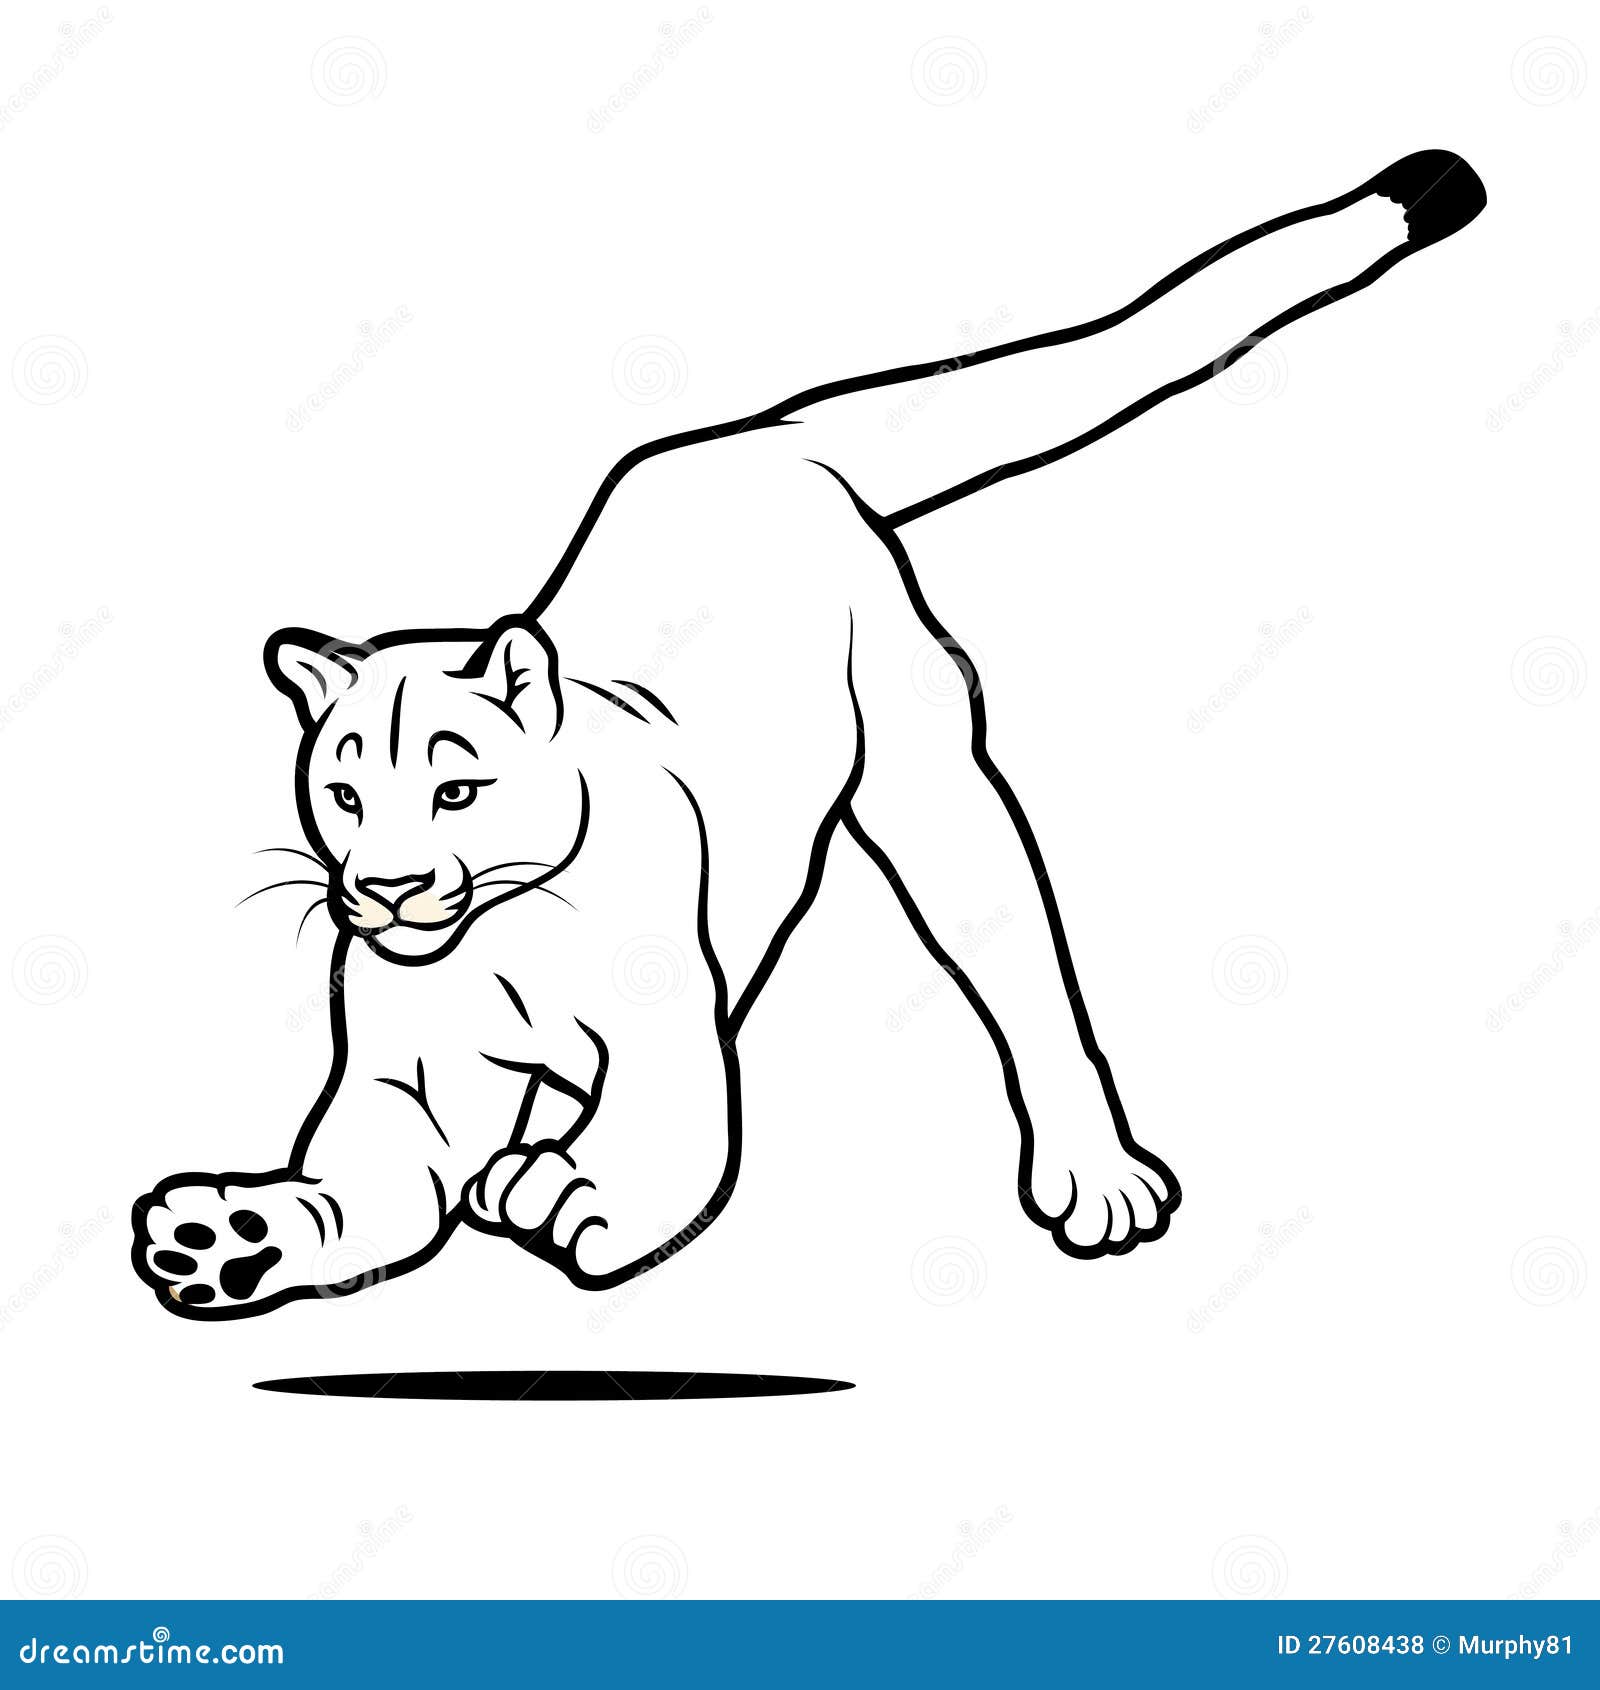 brannon dunn add photo how to draw a cougar